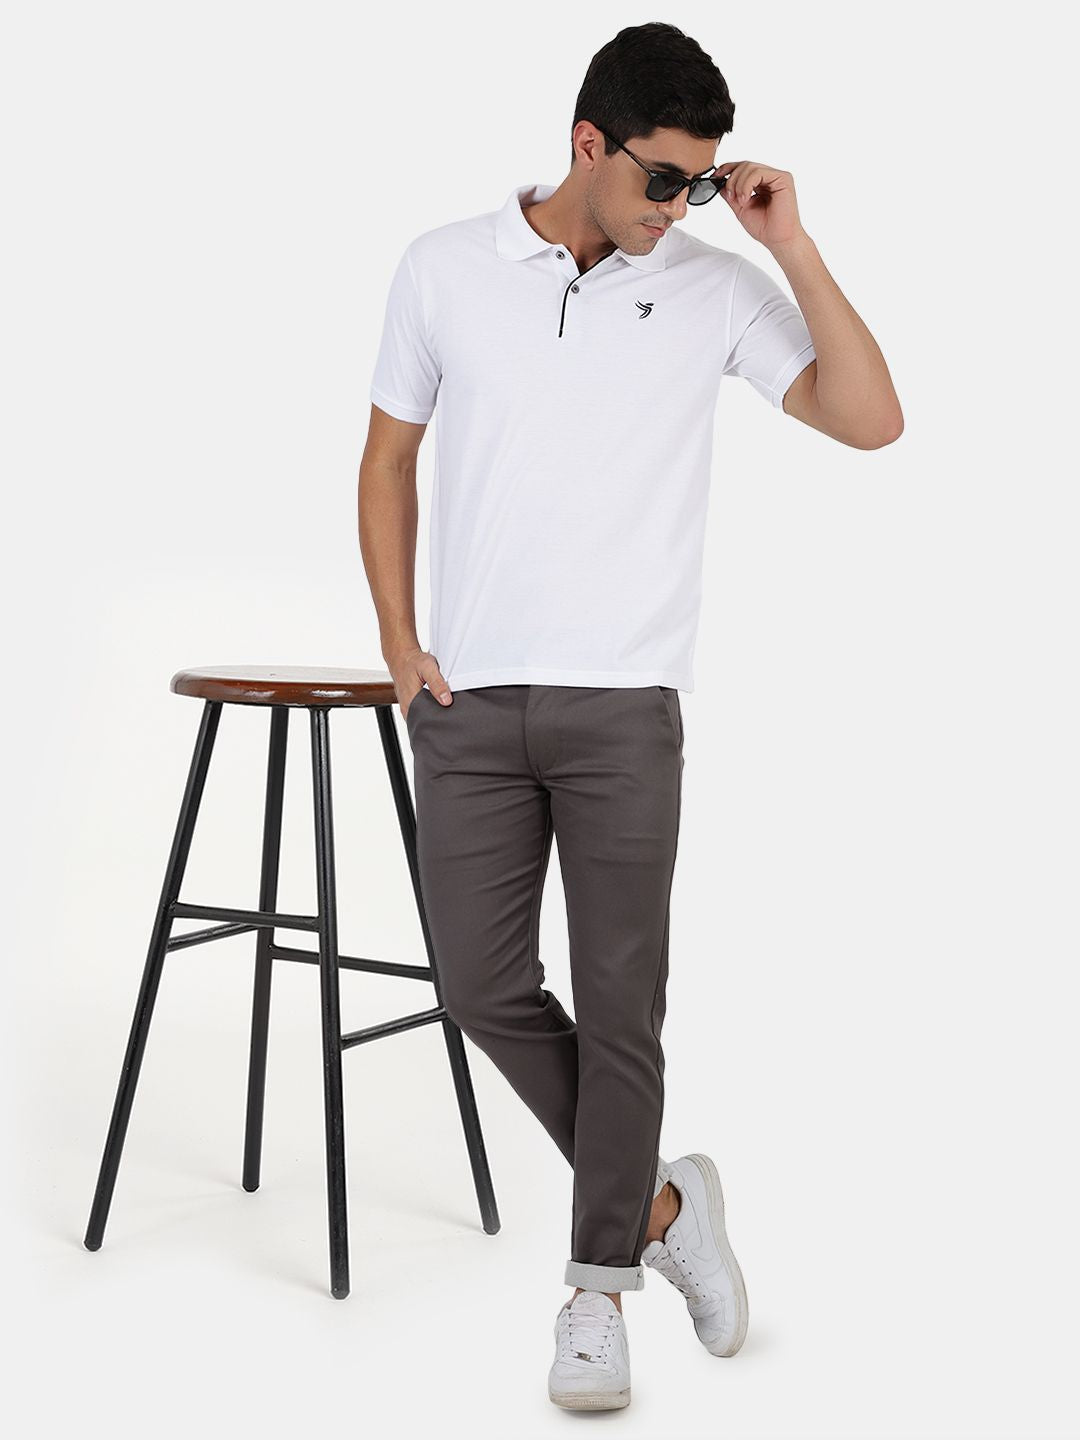 Mentoos Men Poly Cotton Solid Regular Fit Collar Neck Half Sleeves Polo T-Shirt White Mentoos